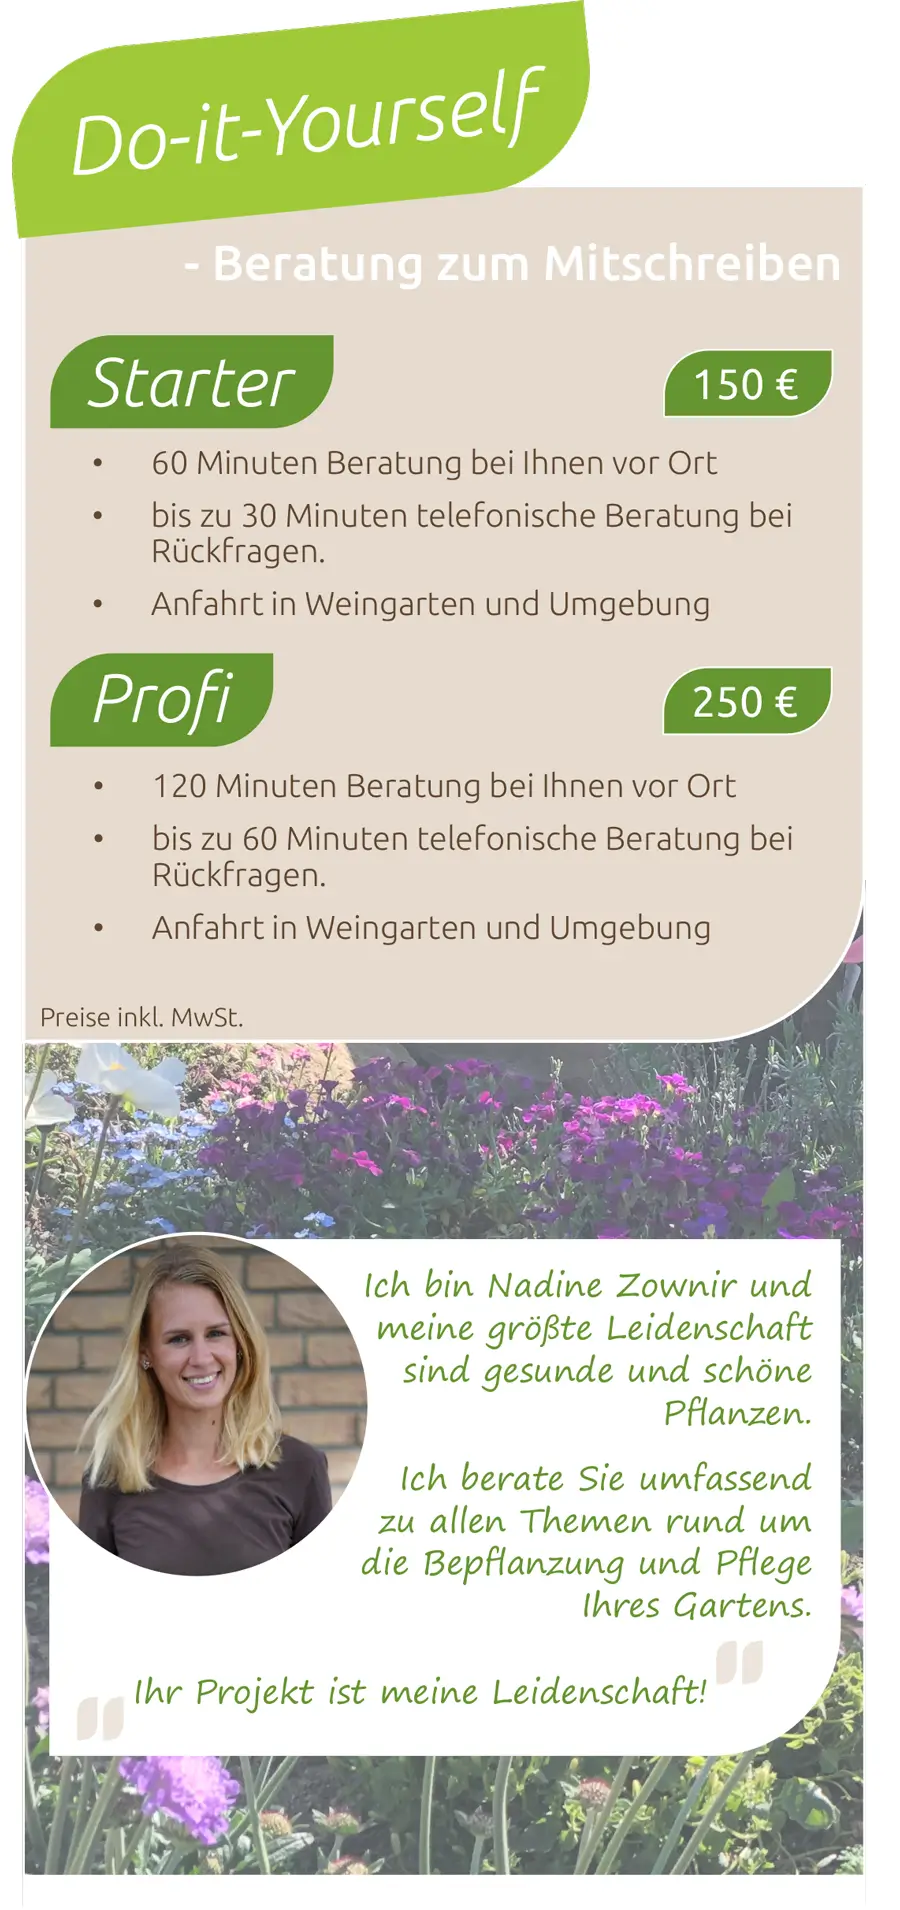 Do-it-Yourself-Beratung_Flyer-1